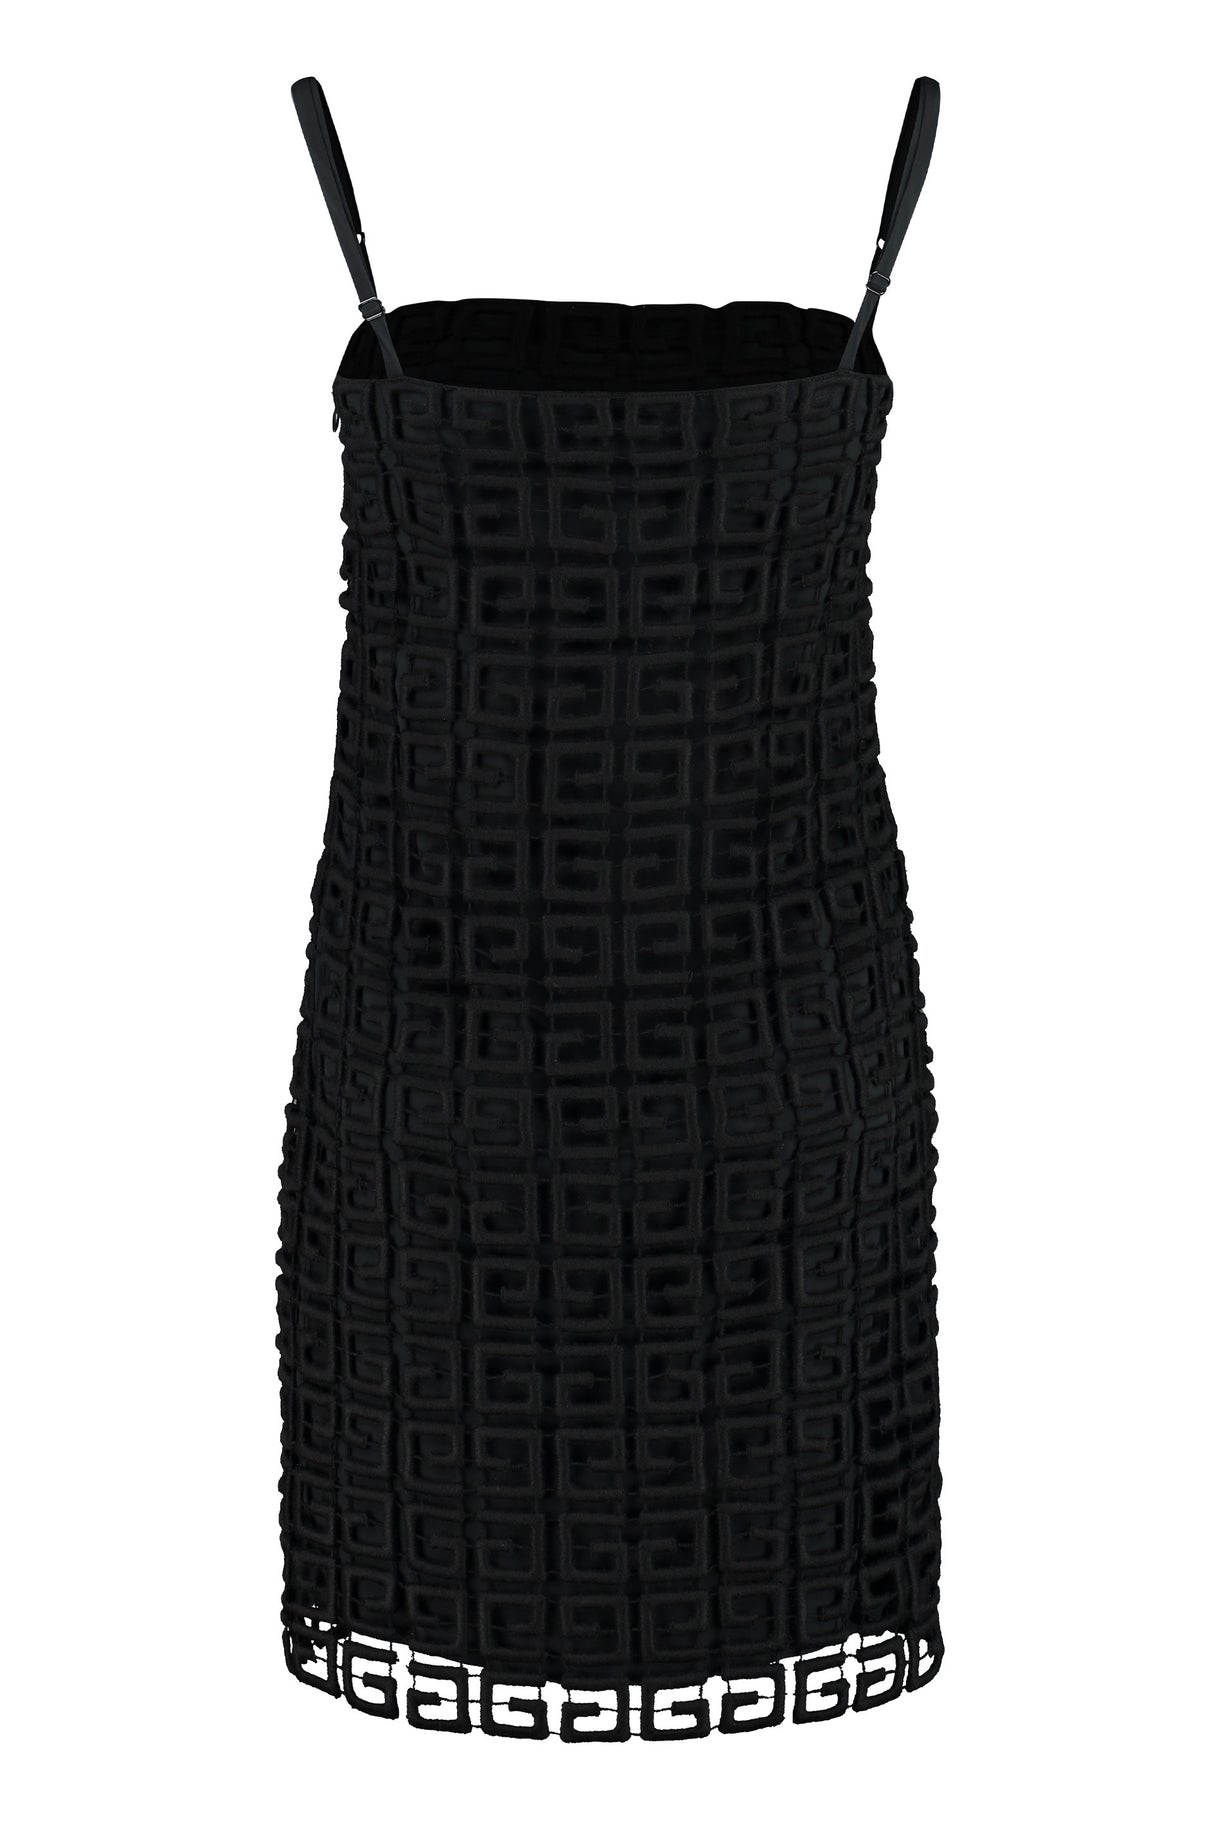 GIVENCHY Stylish Black Knit Dress with Adjustable Straps and Coordinated Slip